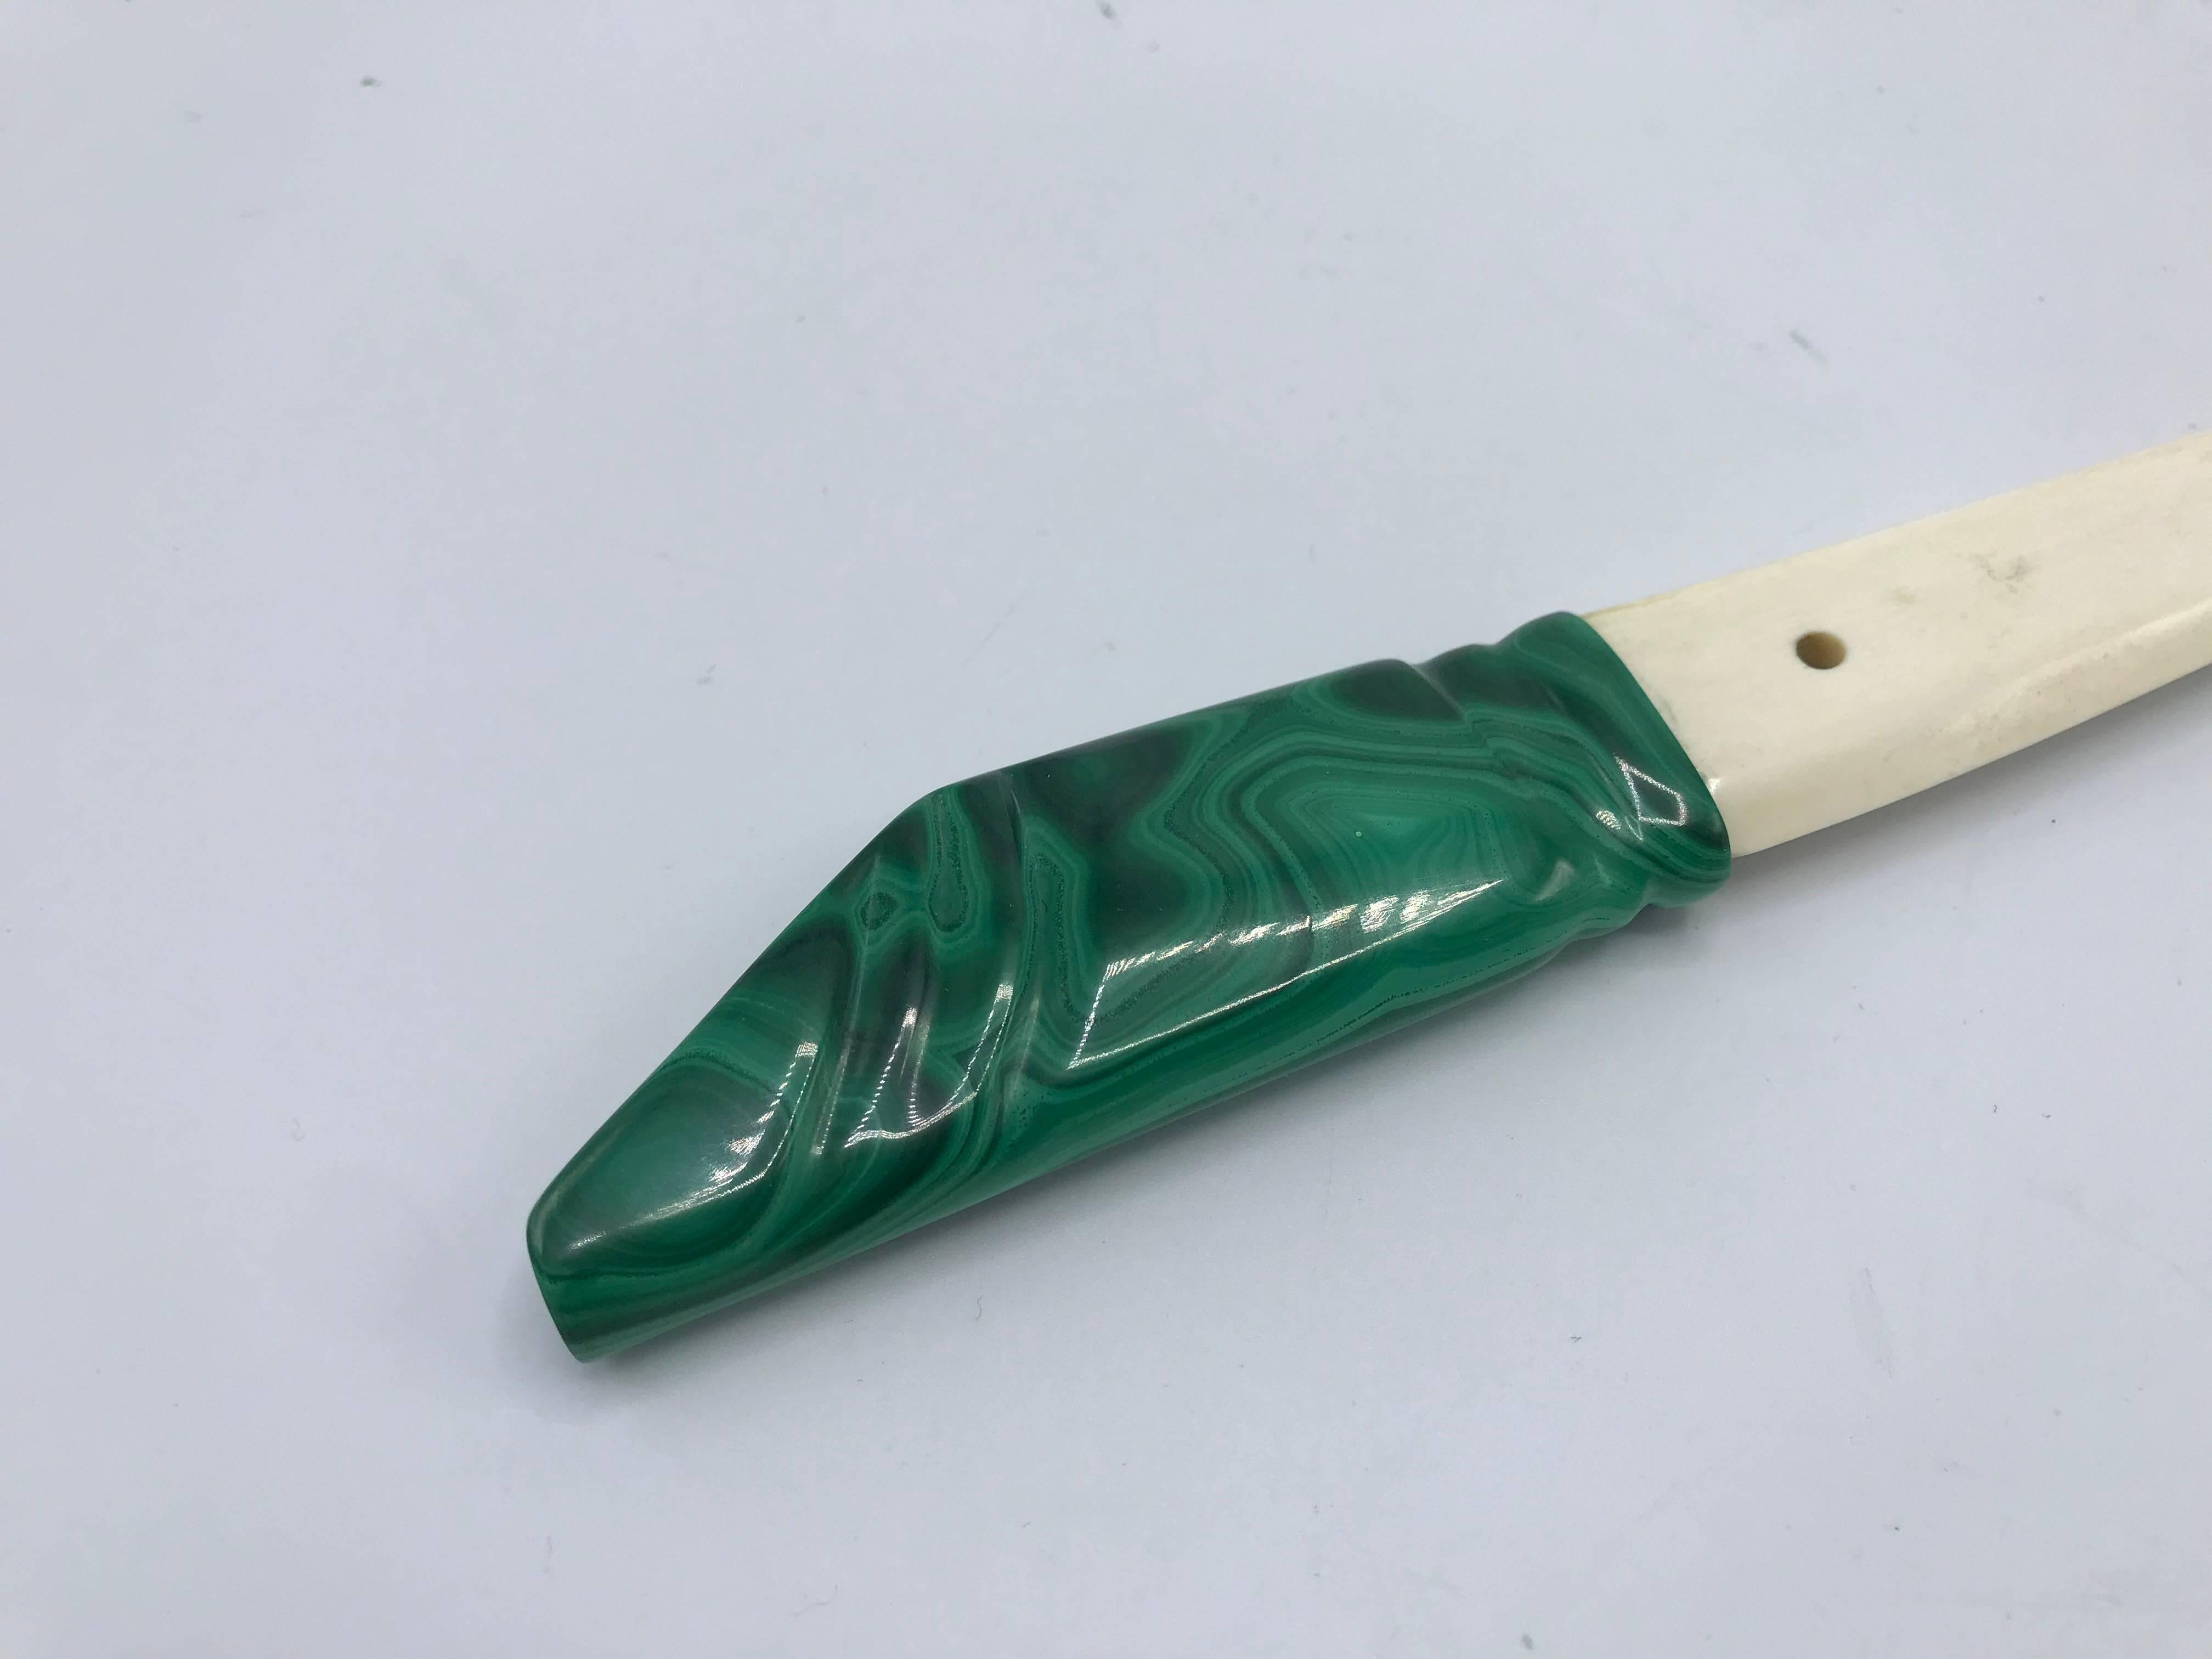 Offered is a stunning and rare, 1960s malachite and bone letter opener. Each side of the solid-malachite handle has beautiful, natural malachite green colors and pattern. Heavy. 